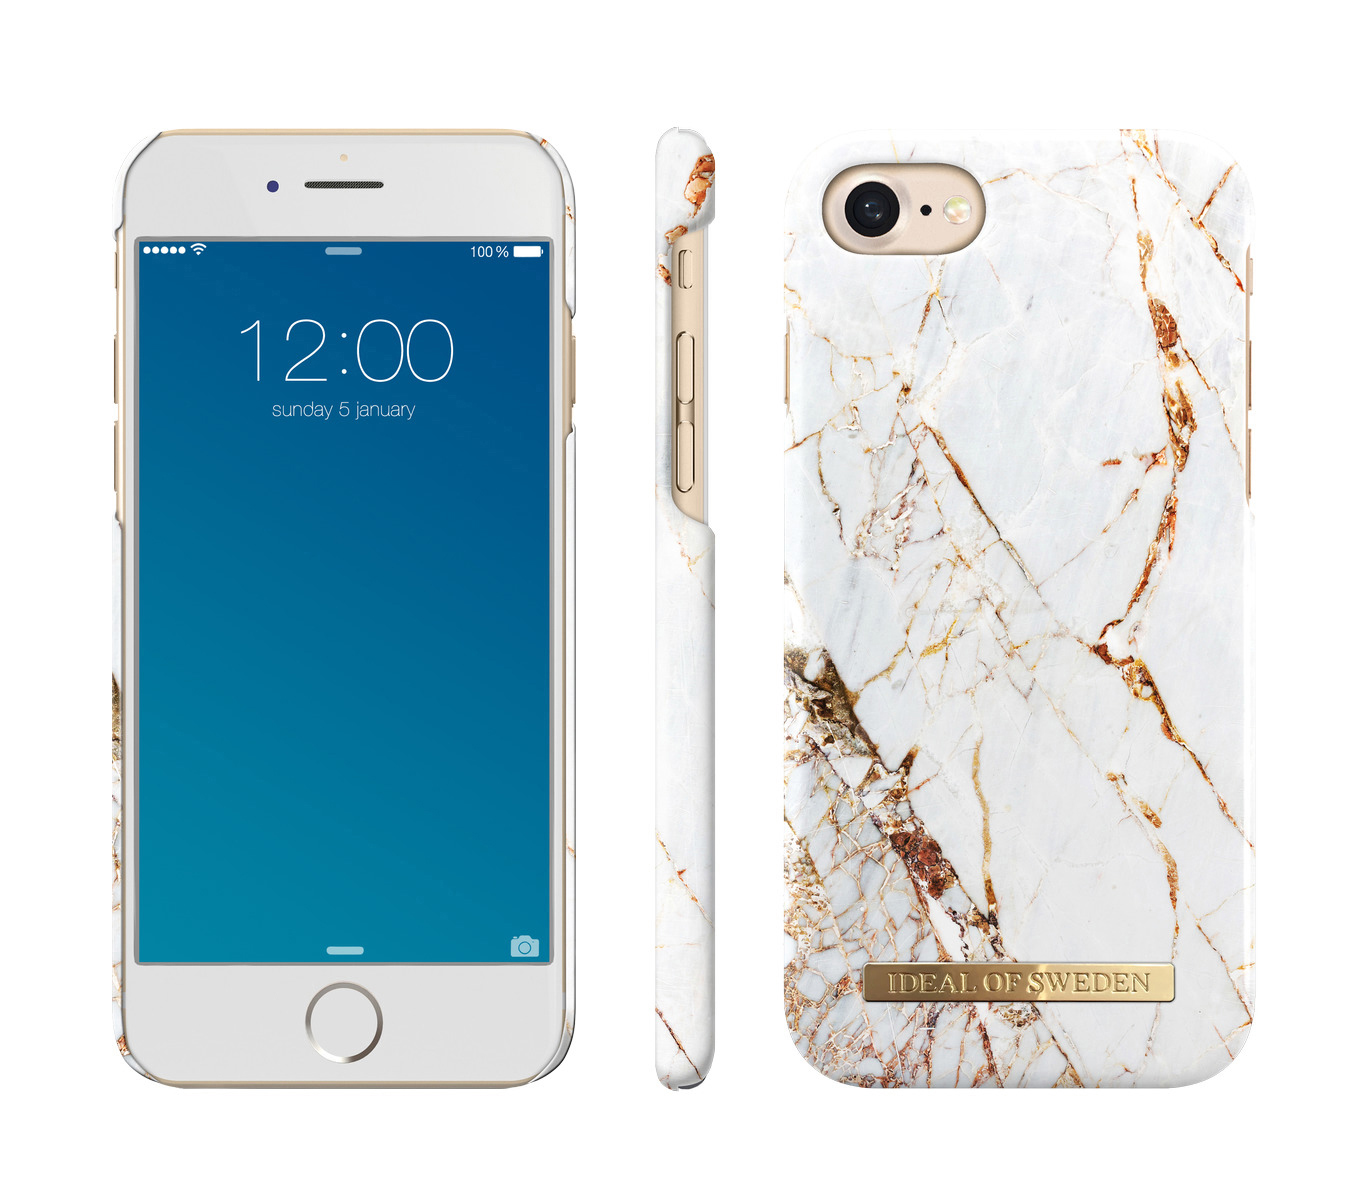 iPhone iPhone Carrara iPhone Fashion, Backcover, 7, Apple, 6, SWEDEN OF IDEAL Gold 8,